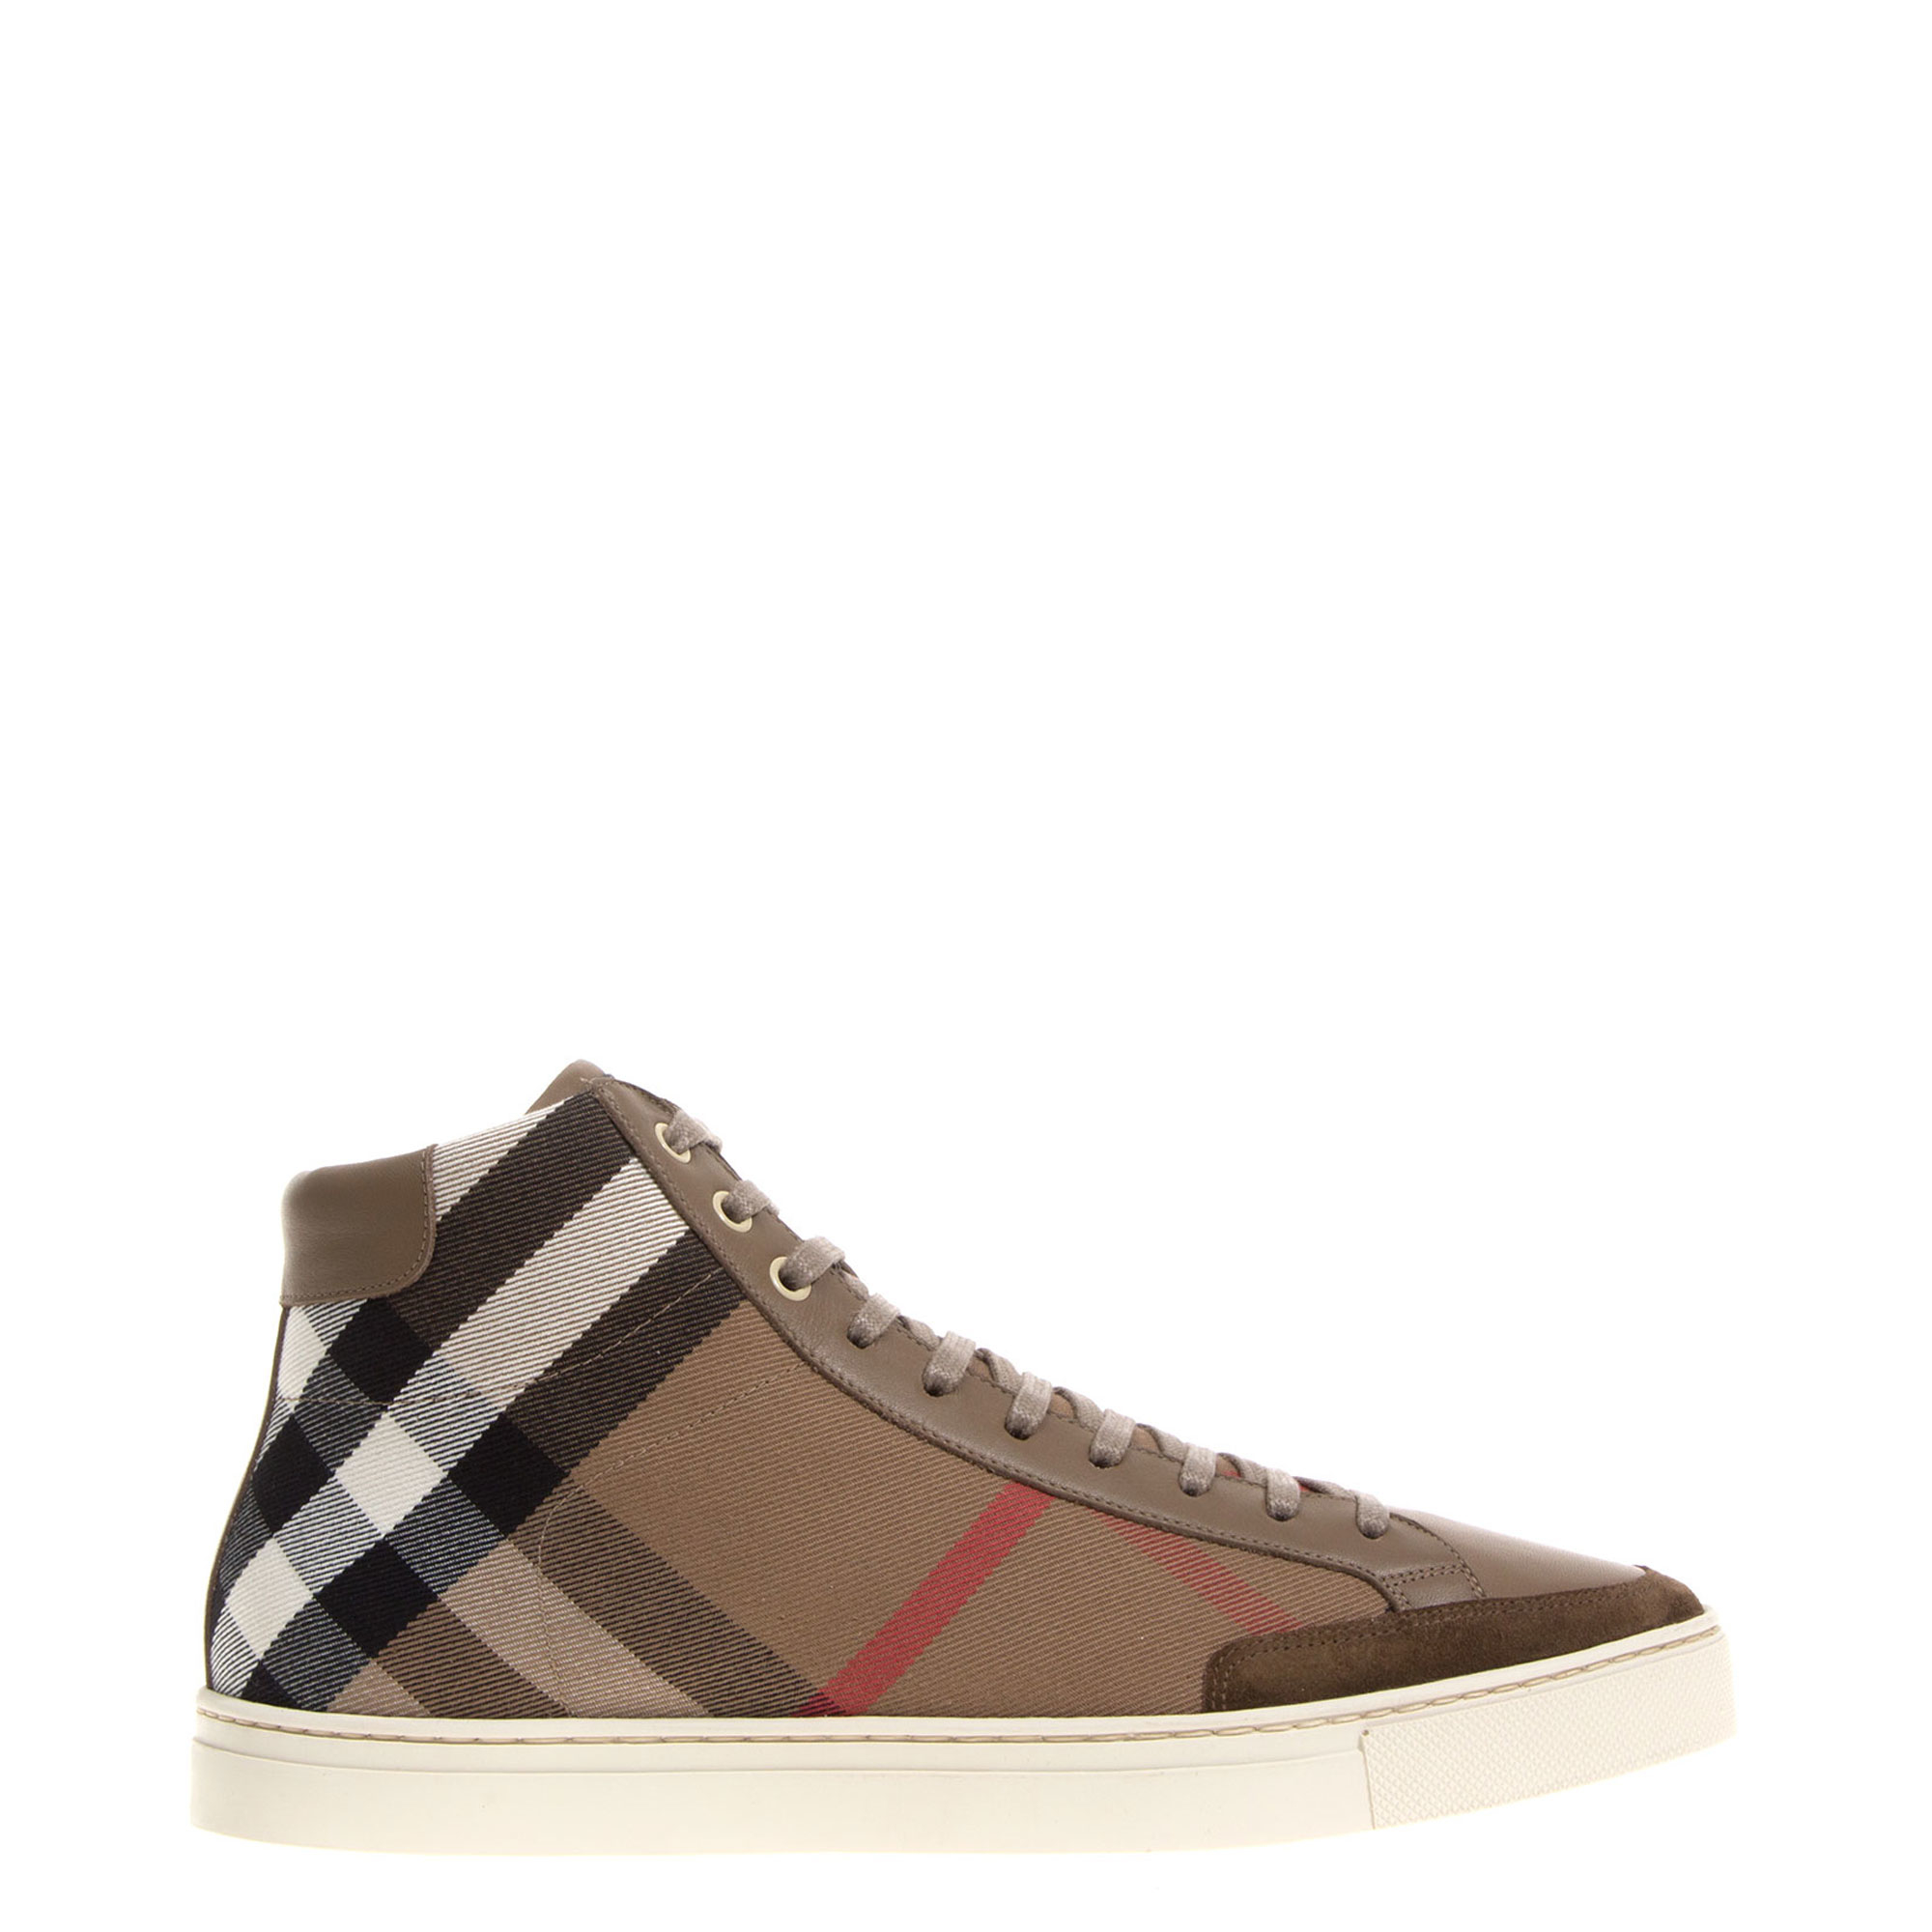 Save 39% Mens Shoes Trainers High-top trainers Burberry Leather Vintage Check High-top Sneakers in Brown for Men 